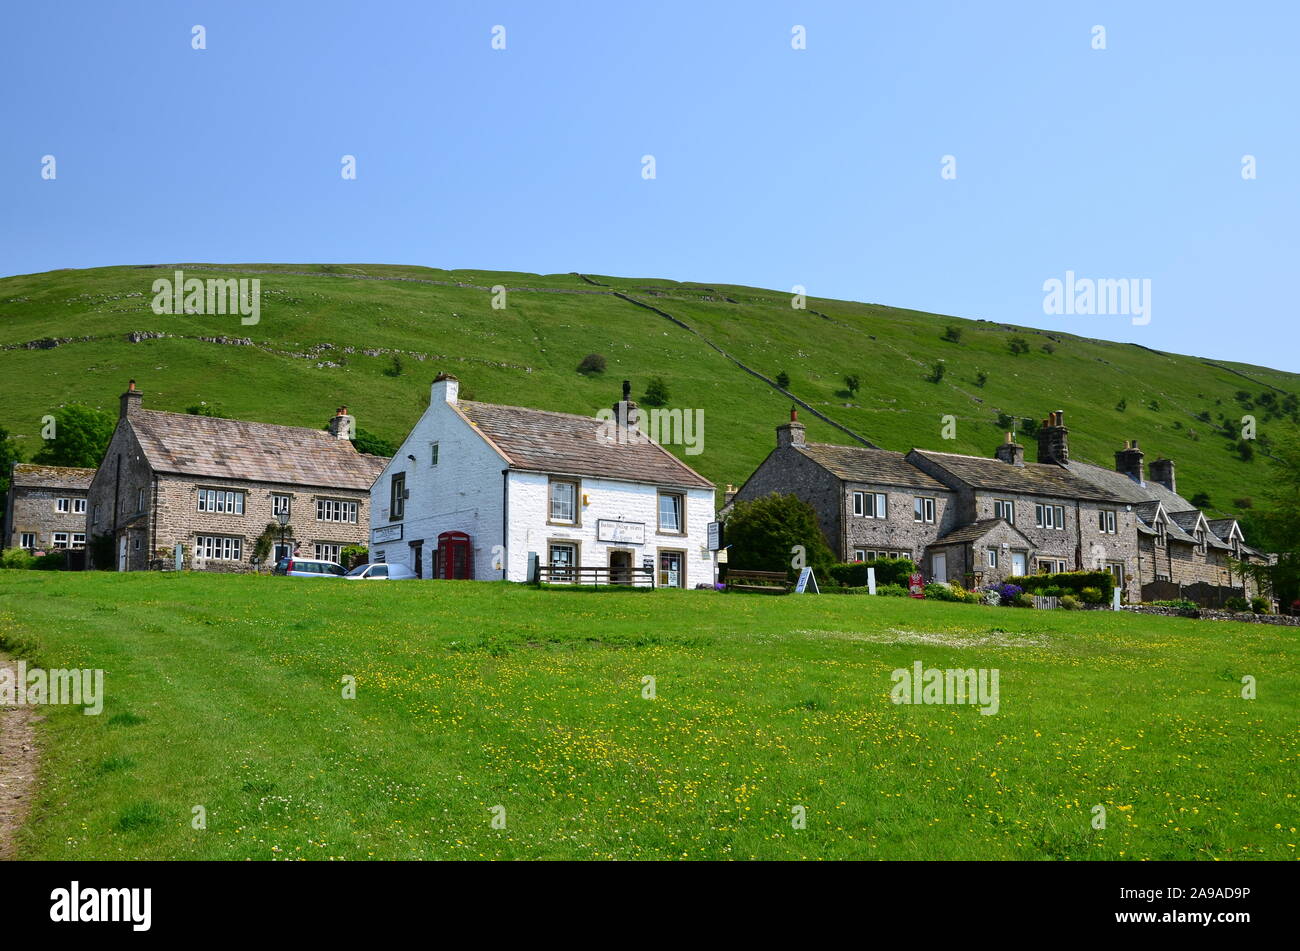 Buckden, Upper Wharfedale, North Yorkshire Stock Photo